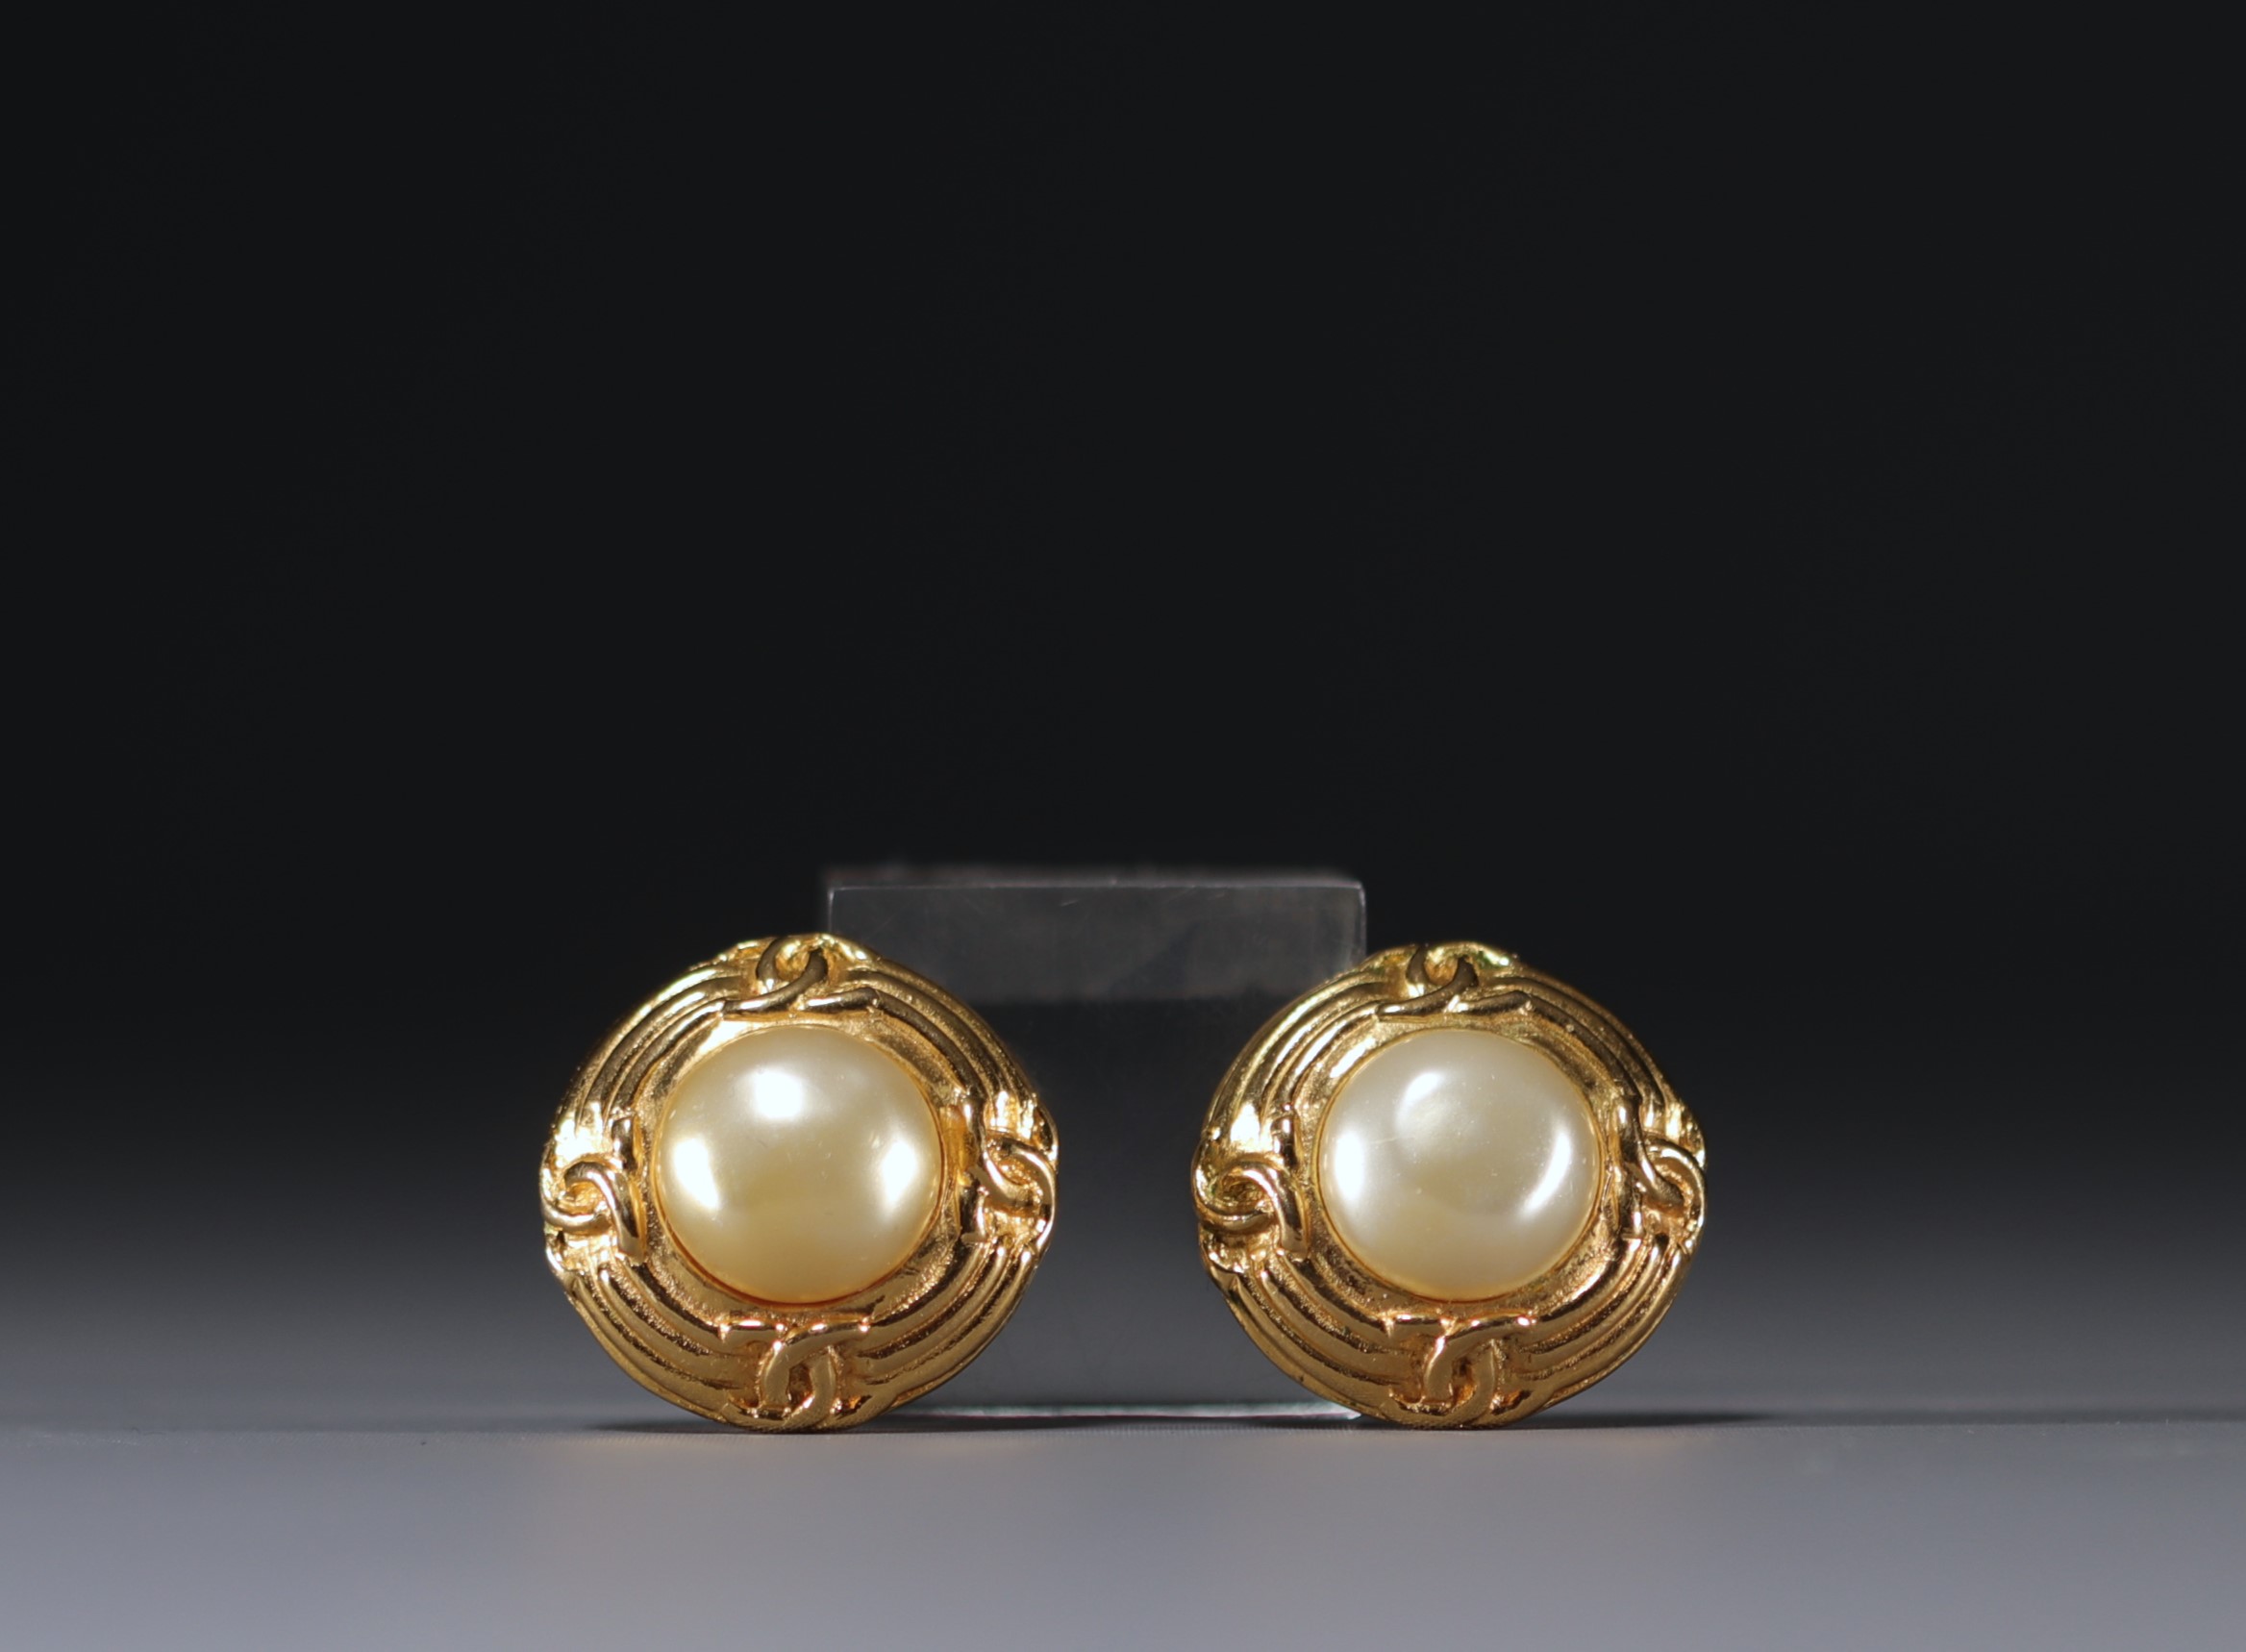 CHANEL - Pair of gold-coloured earrings, mother-of-pearl cabochon. - Image 2 of 3